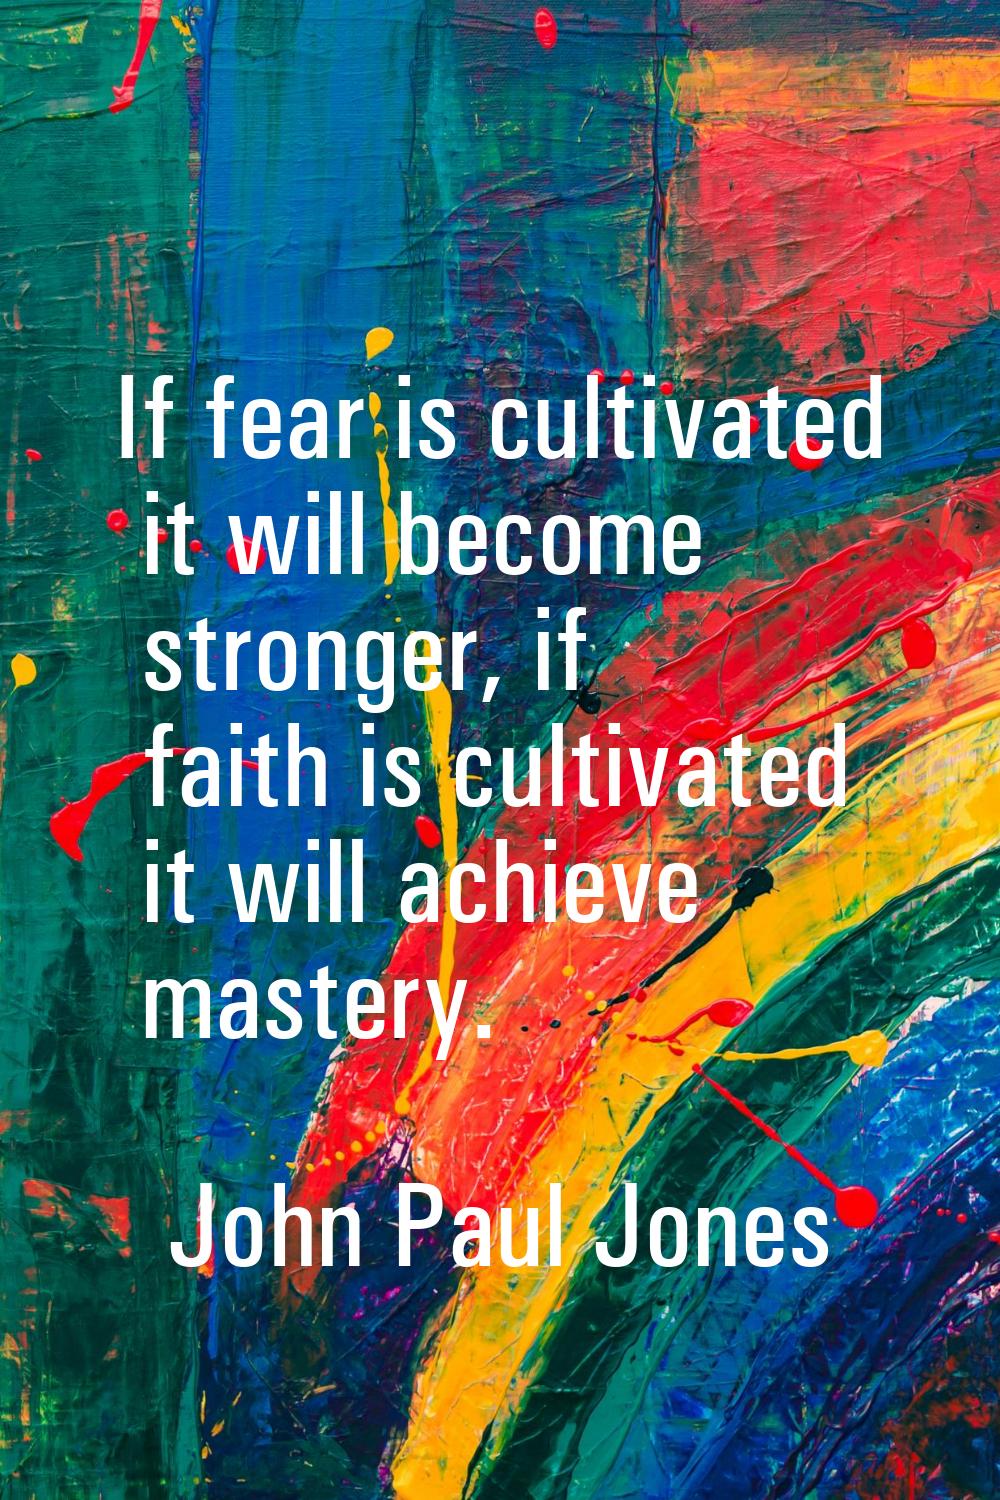 If fear is cultivated it will become stronger, if faith is cultivated it will achieve mastery.